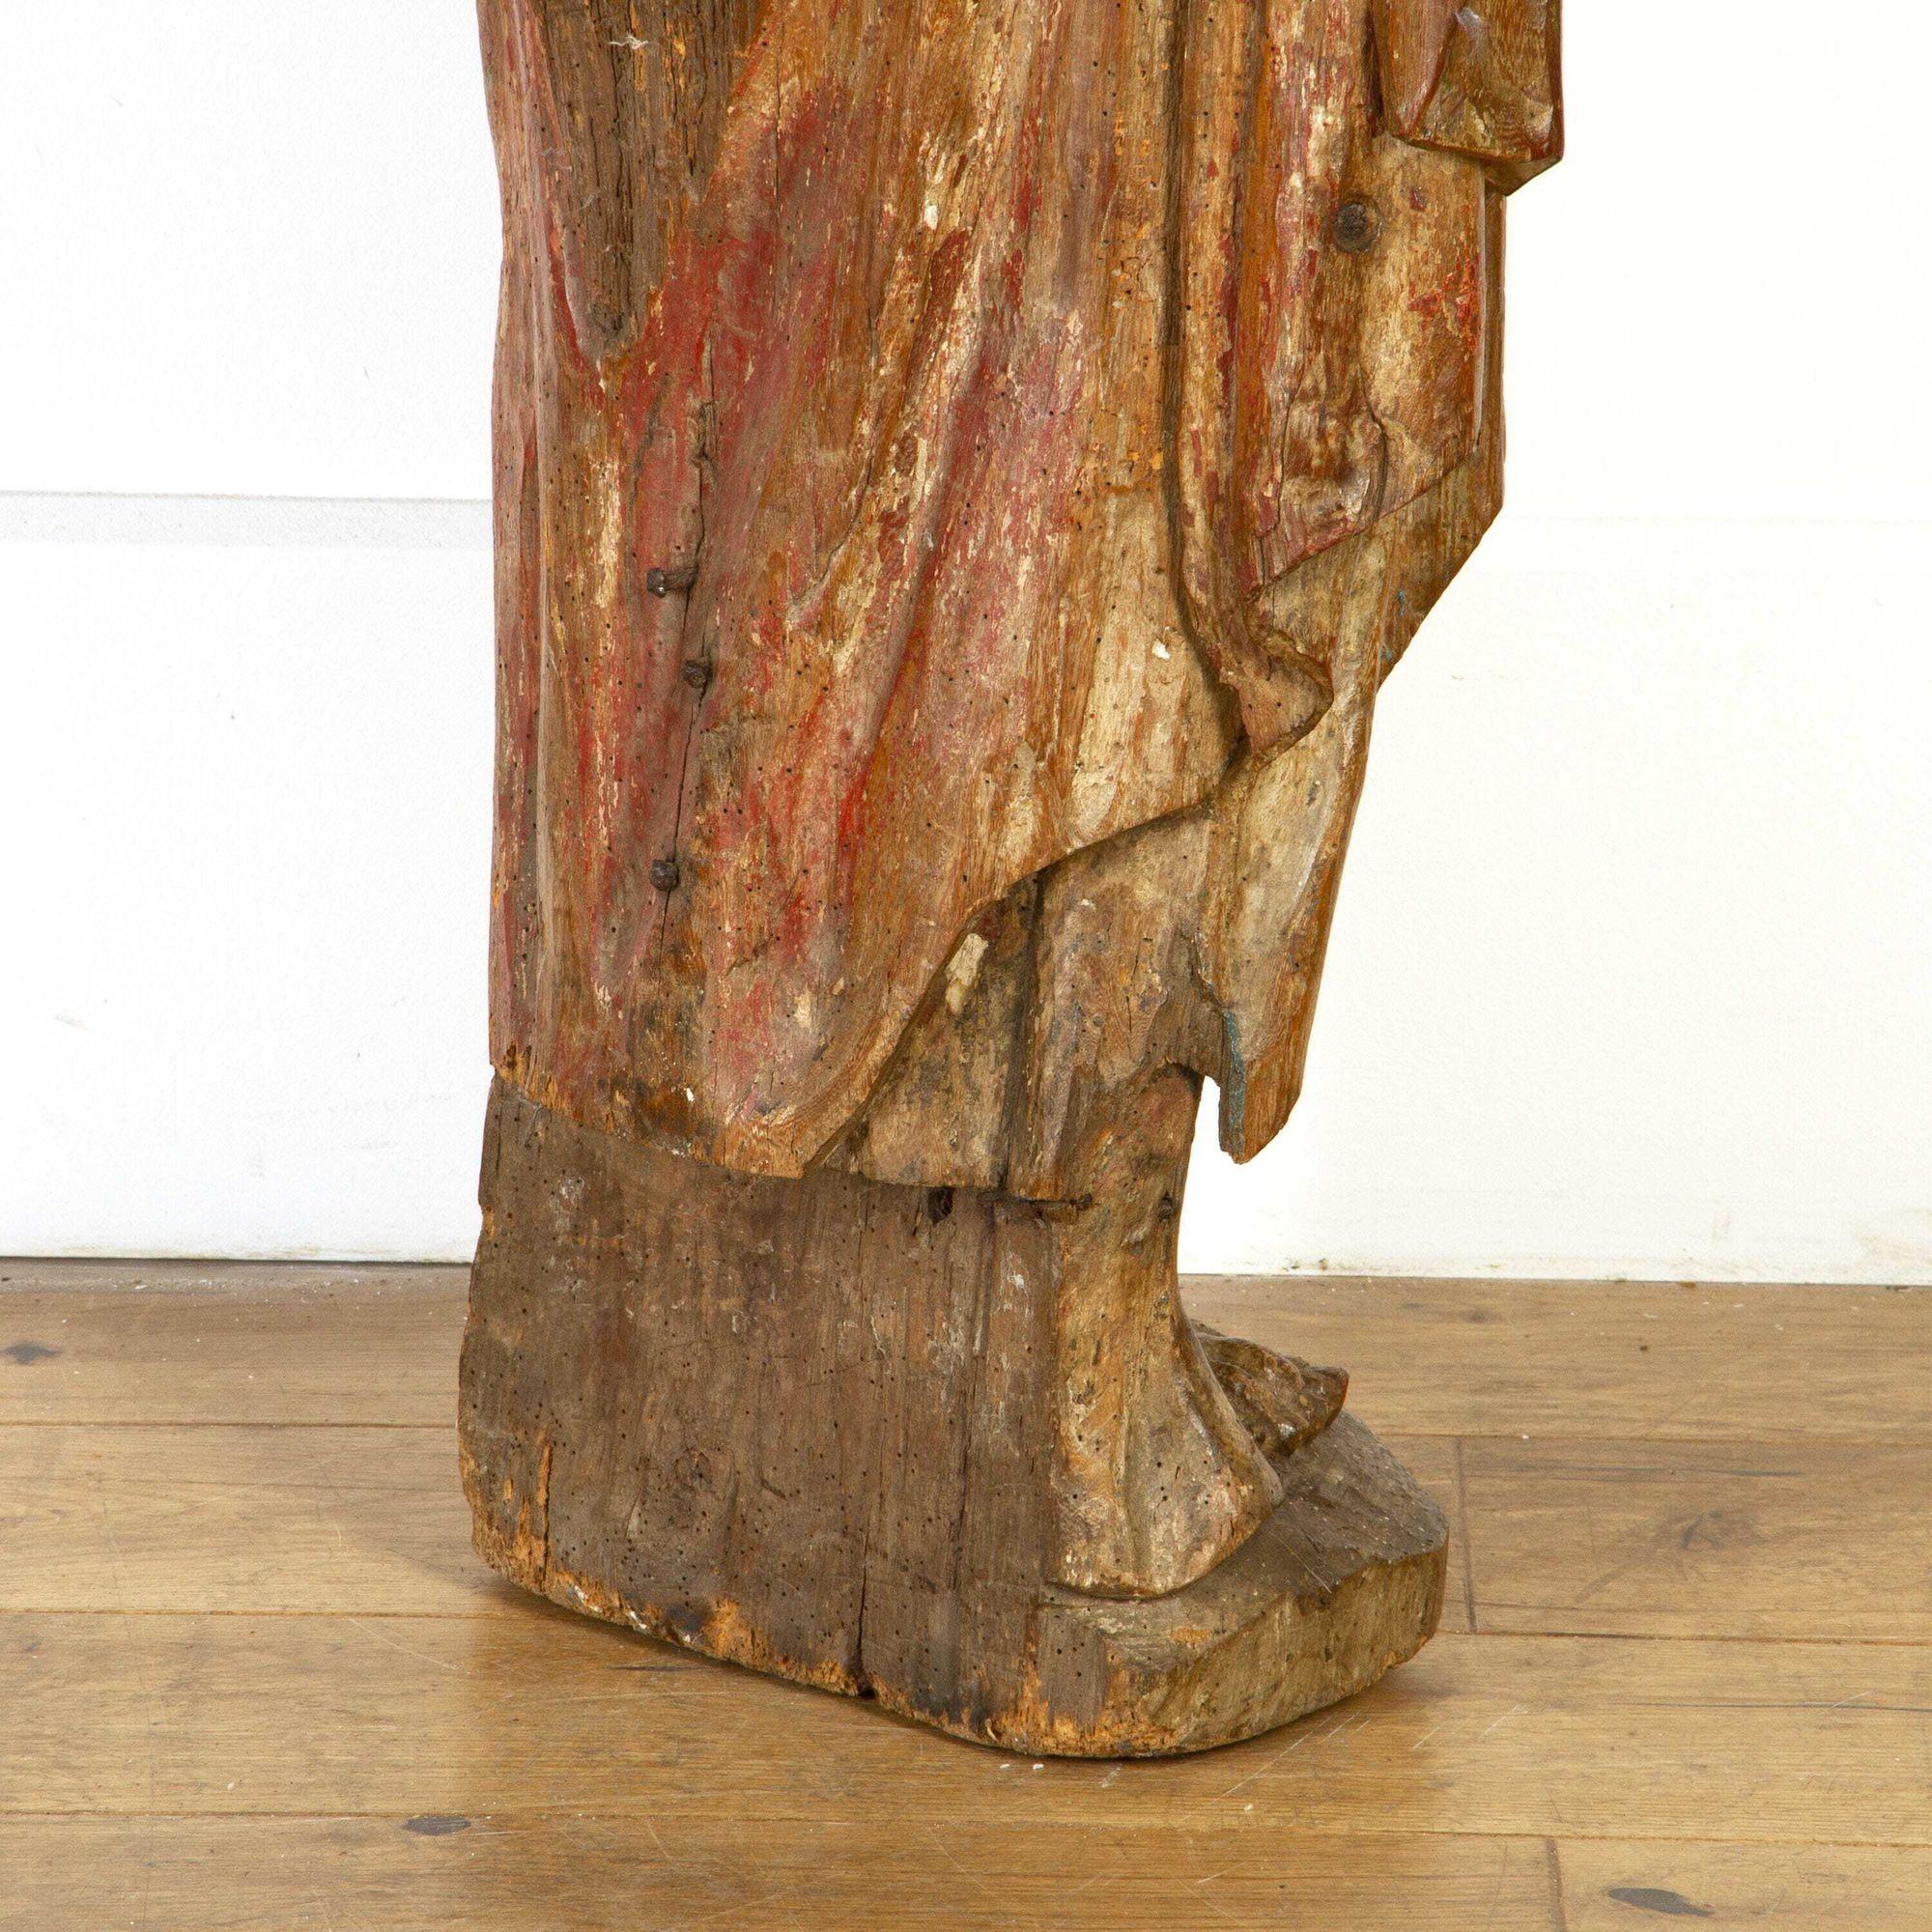 Mid 17th century Northern European carved figure of a saint. 
This striking statue depicts a saint who is dressed in robes, whilst holding his hand over his heart. This figure is freestanding and is stood within a leaning position which makes him